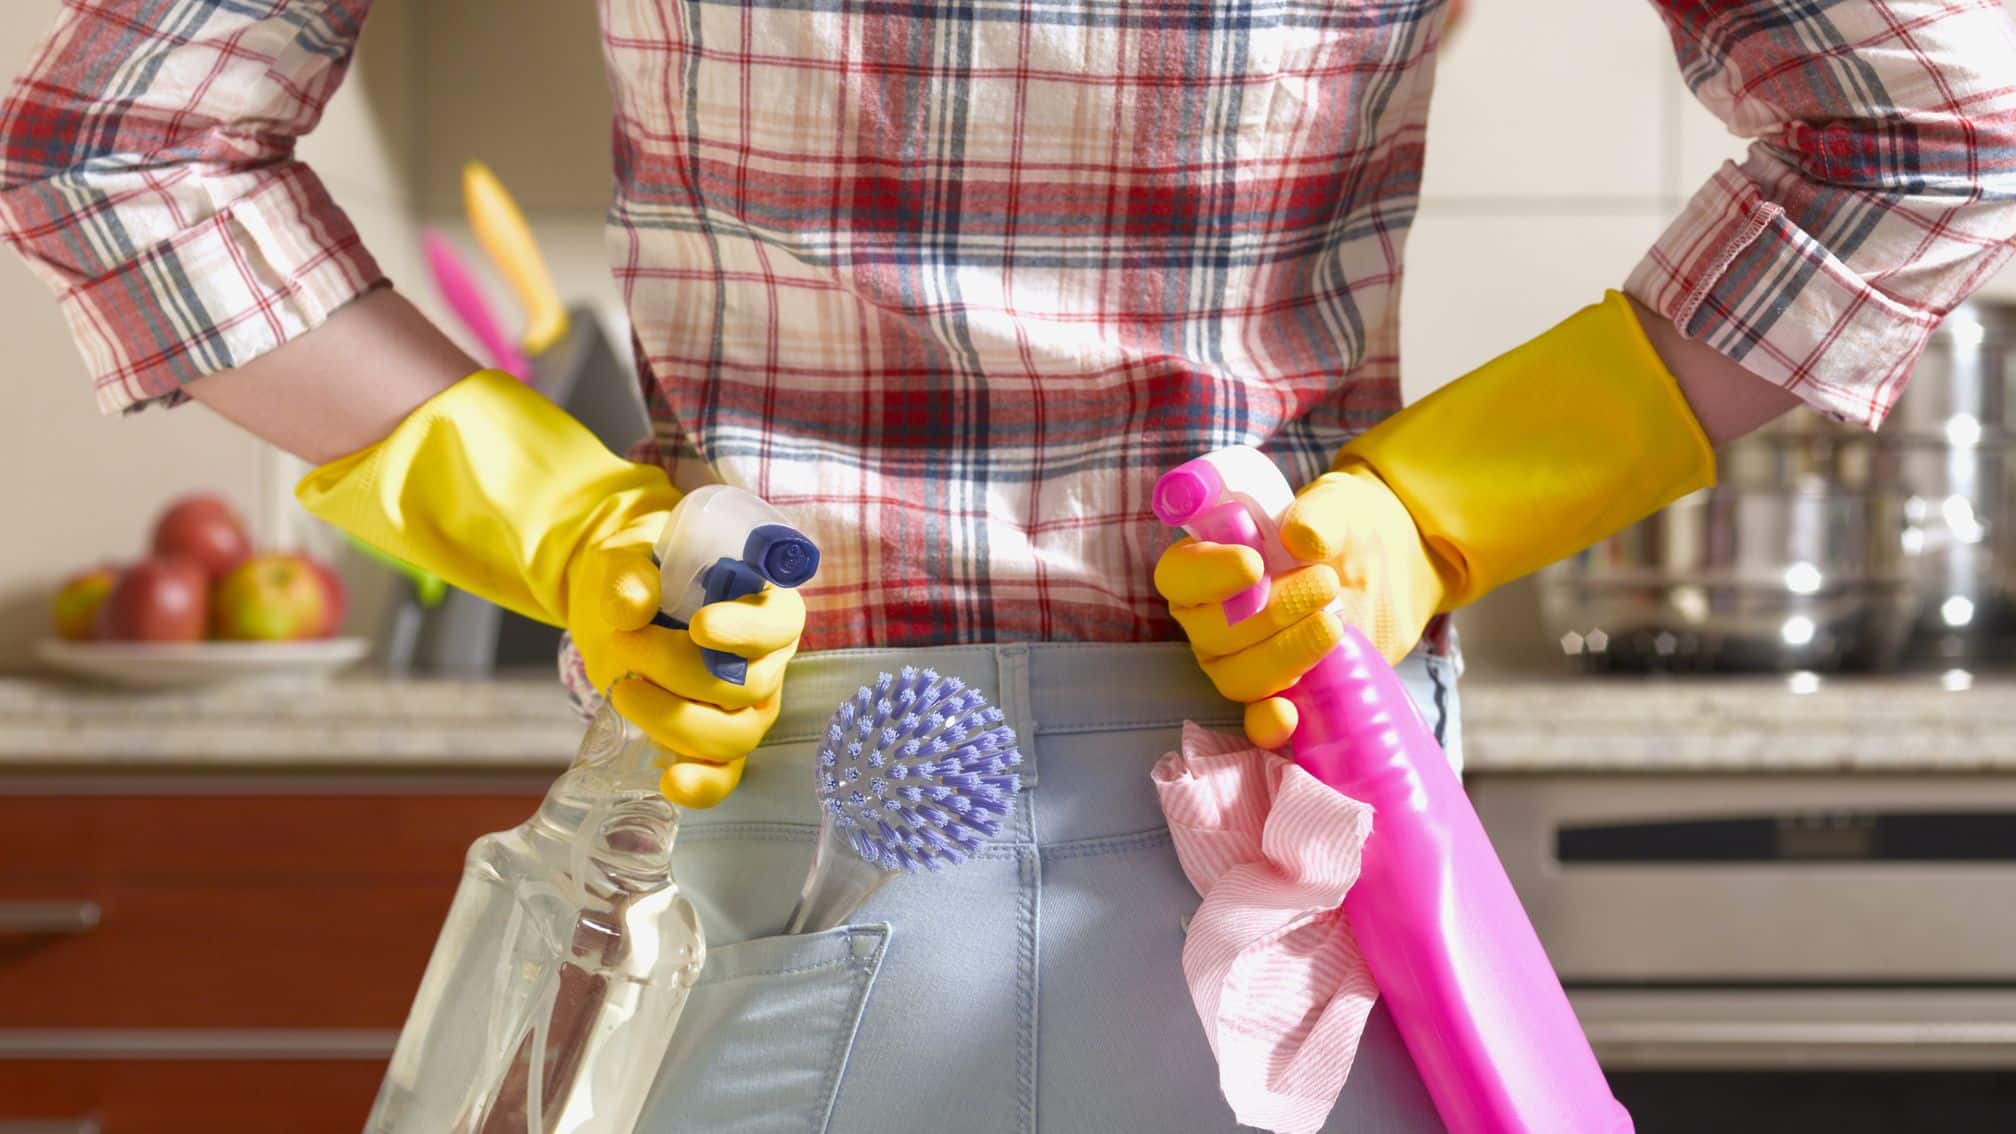 How Do I Make a House Cleaning Checklist?